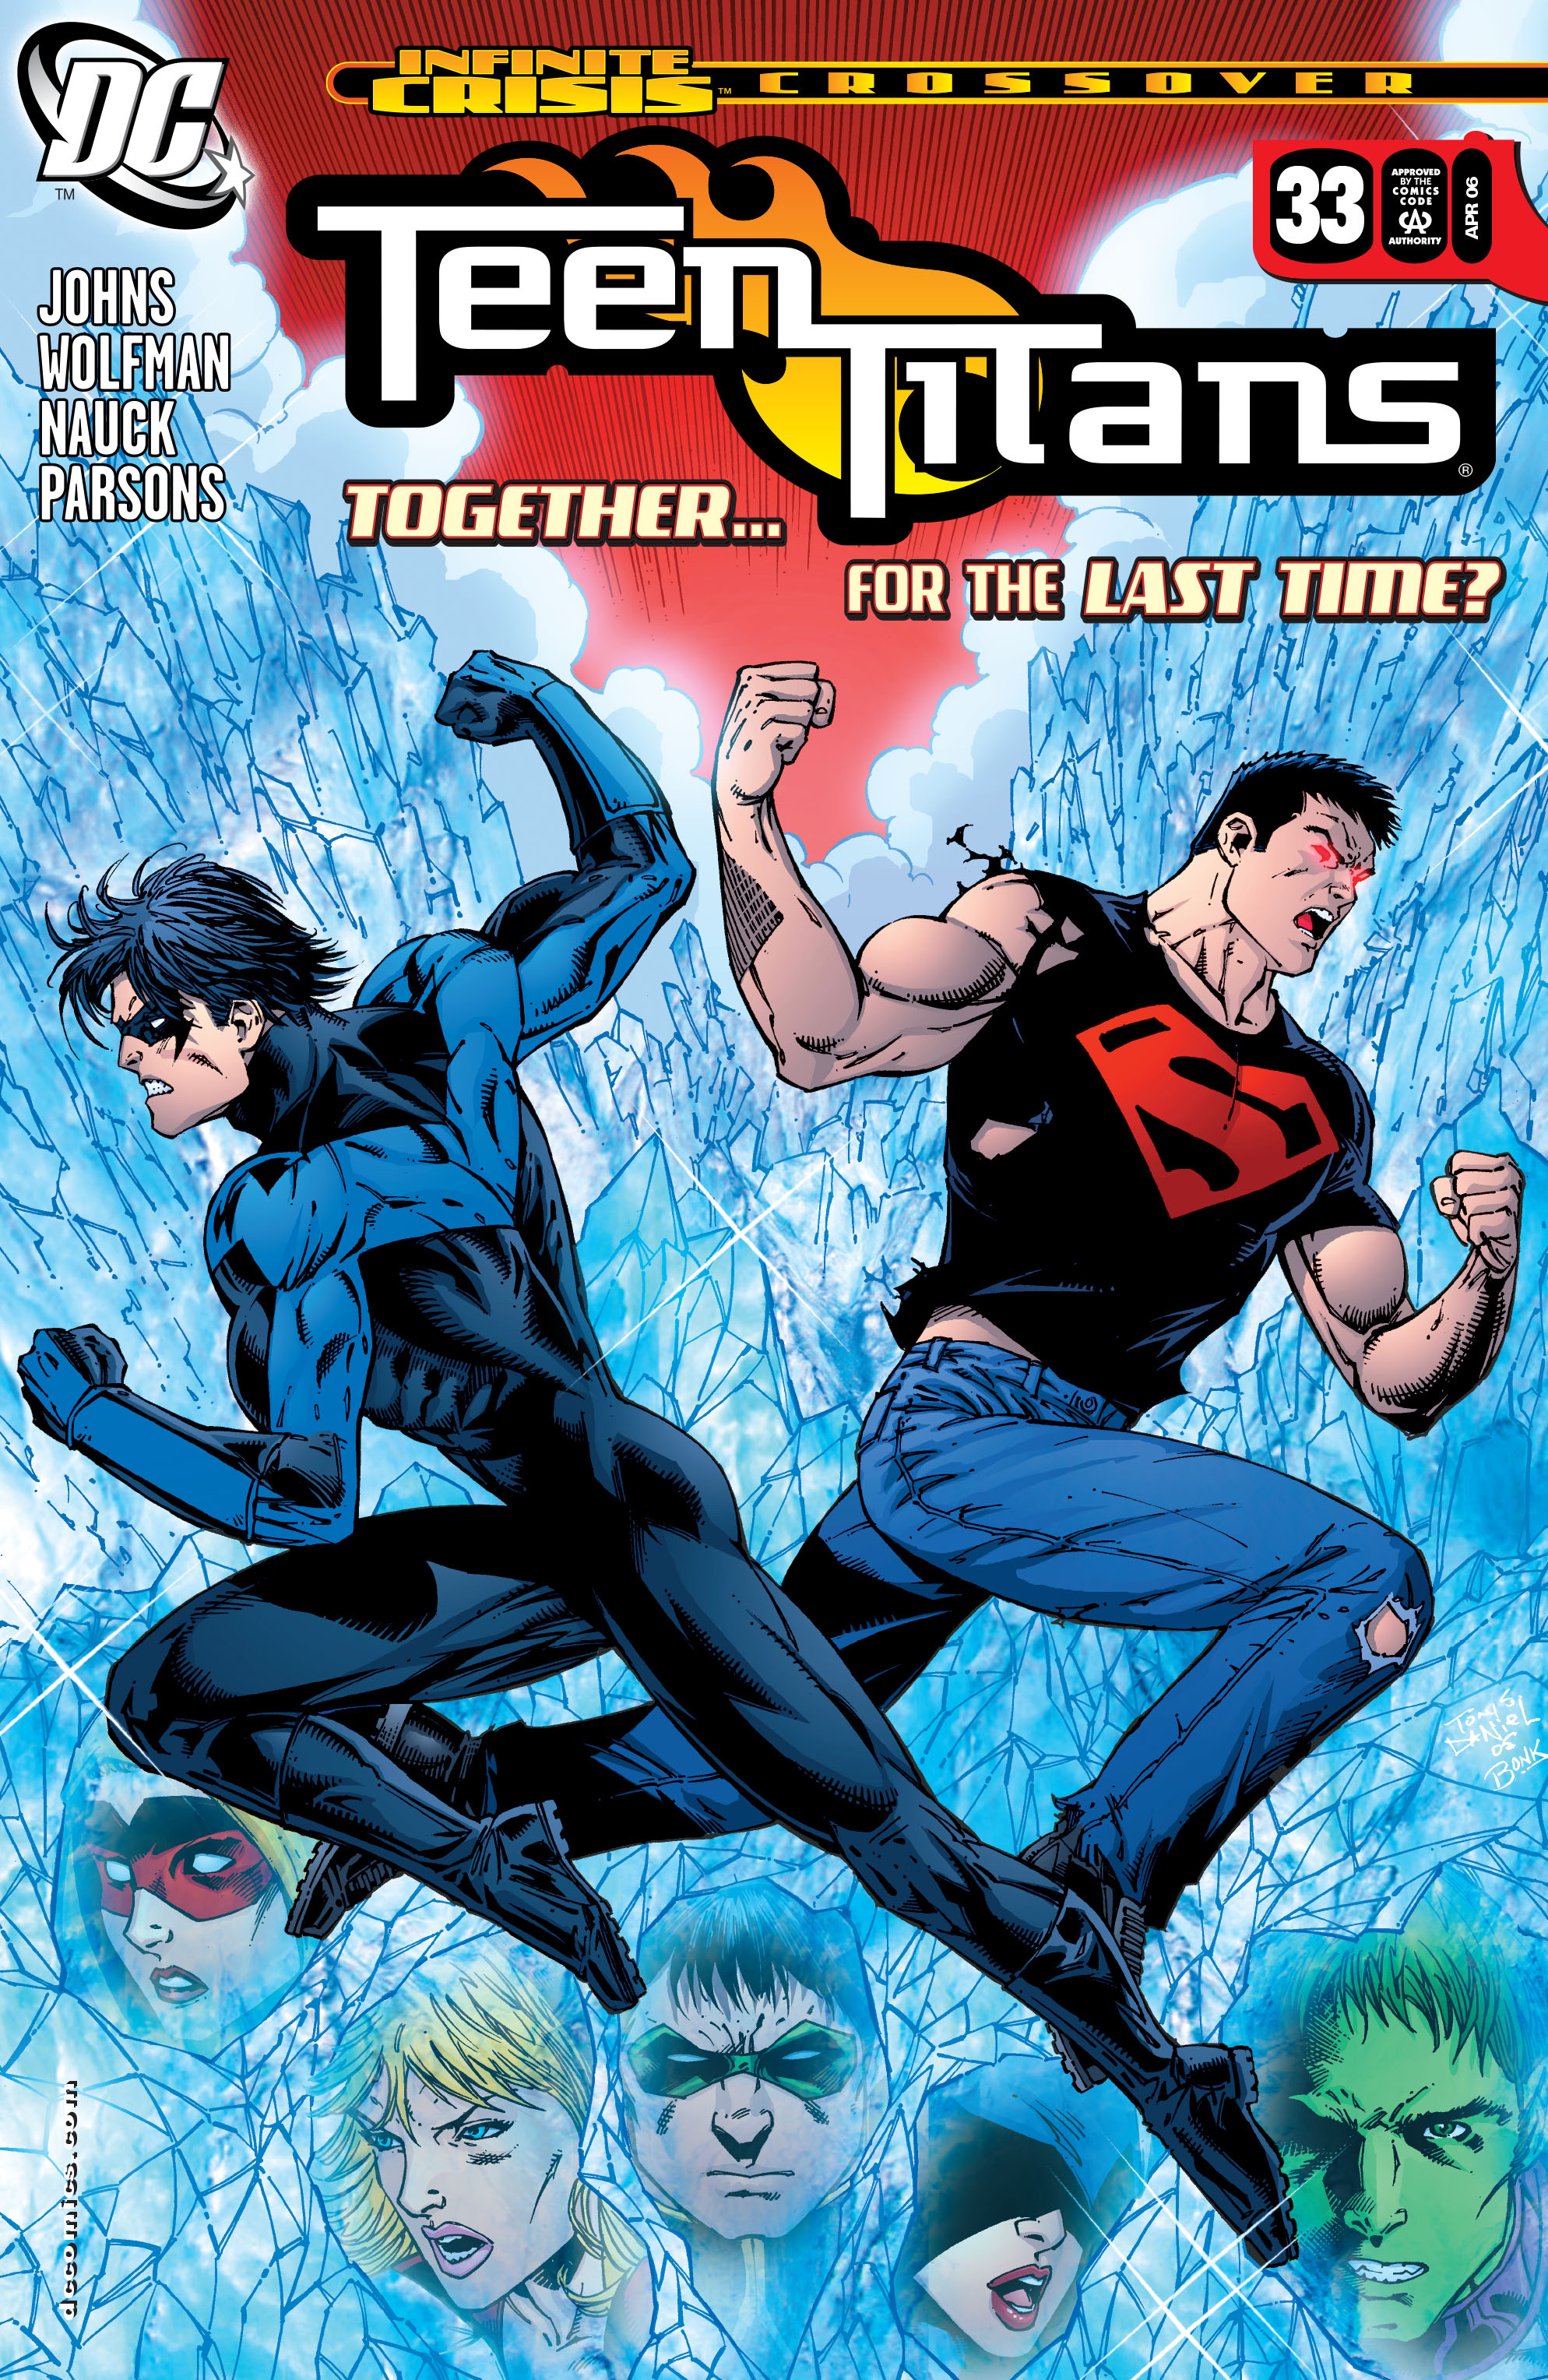 Read online Teen Titans (2003) comic -  Issue #33 - 1